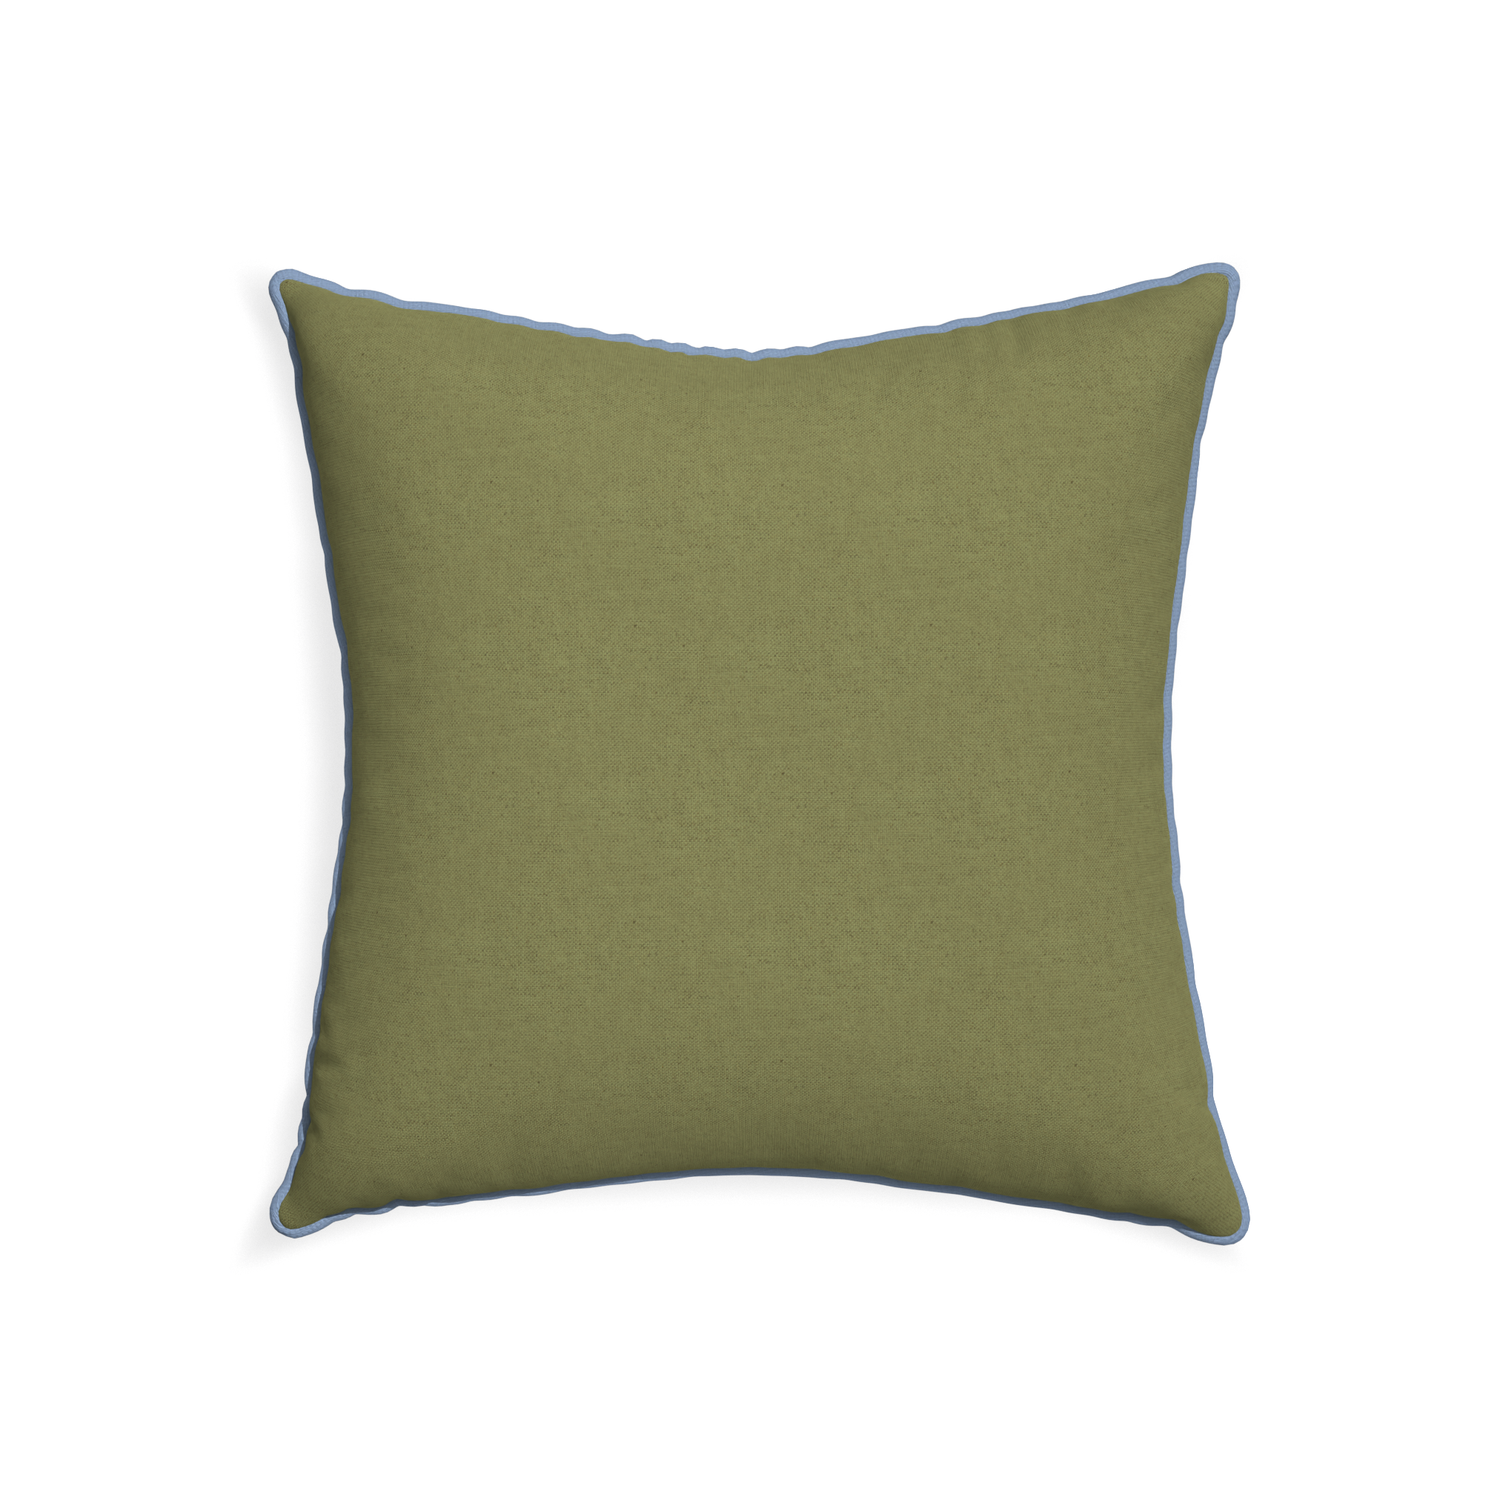 22-square moss custom moss greenpillow with sky piping on white background